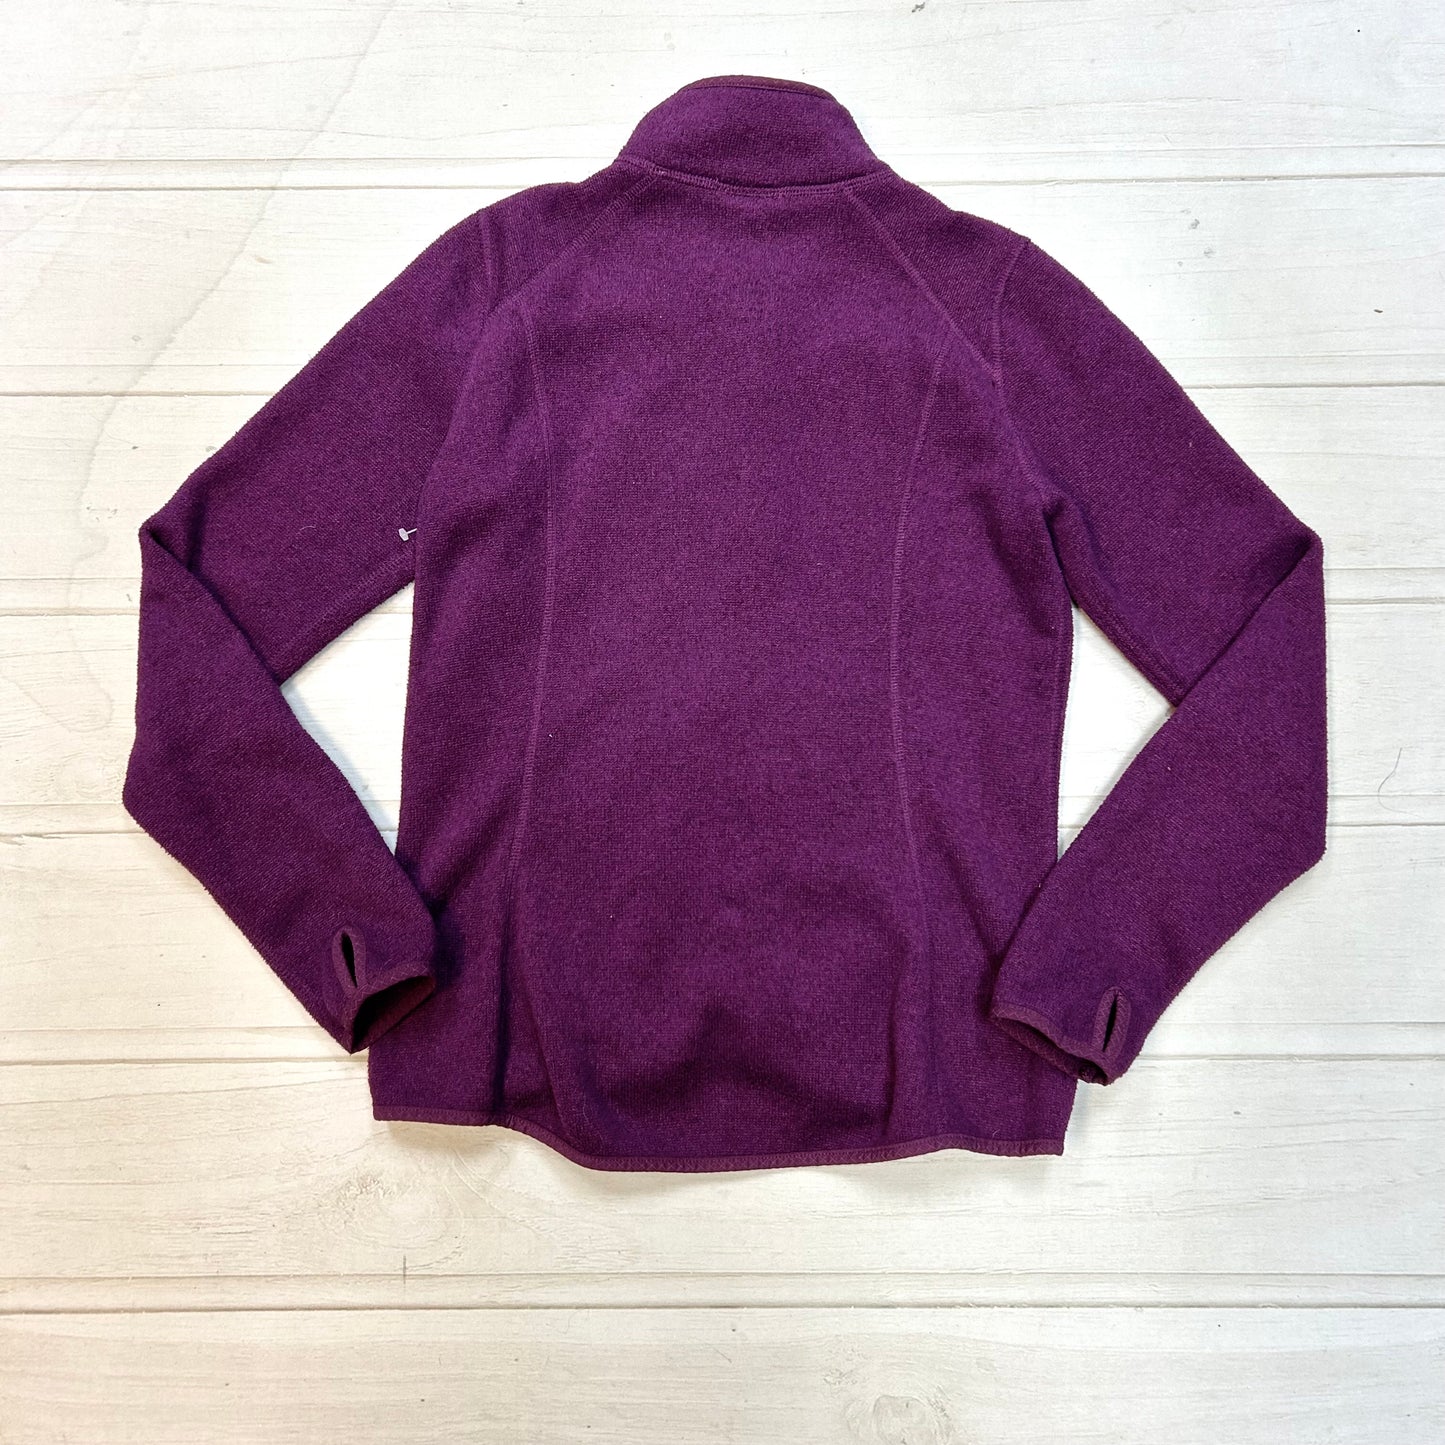 Athletic Fleece By North Face  Size: M